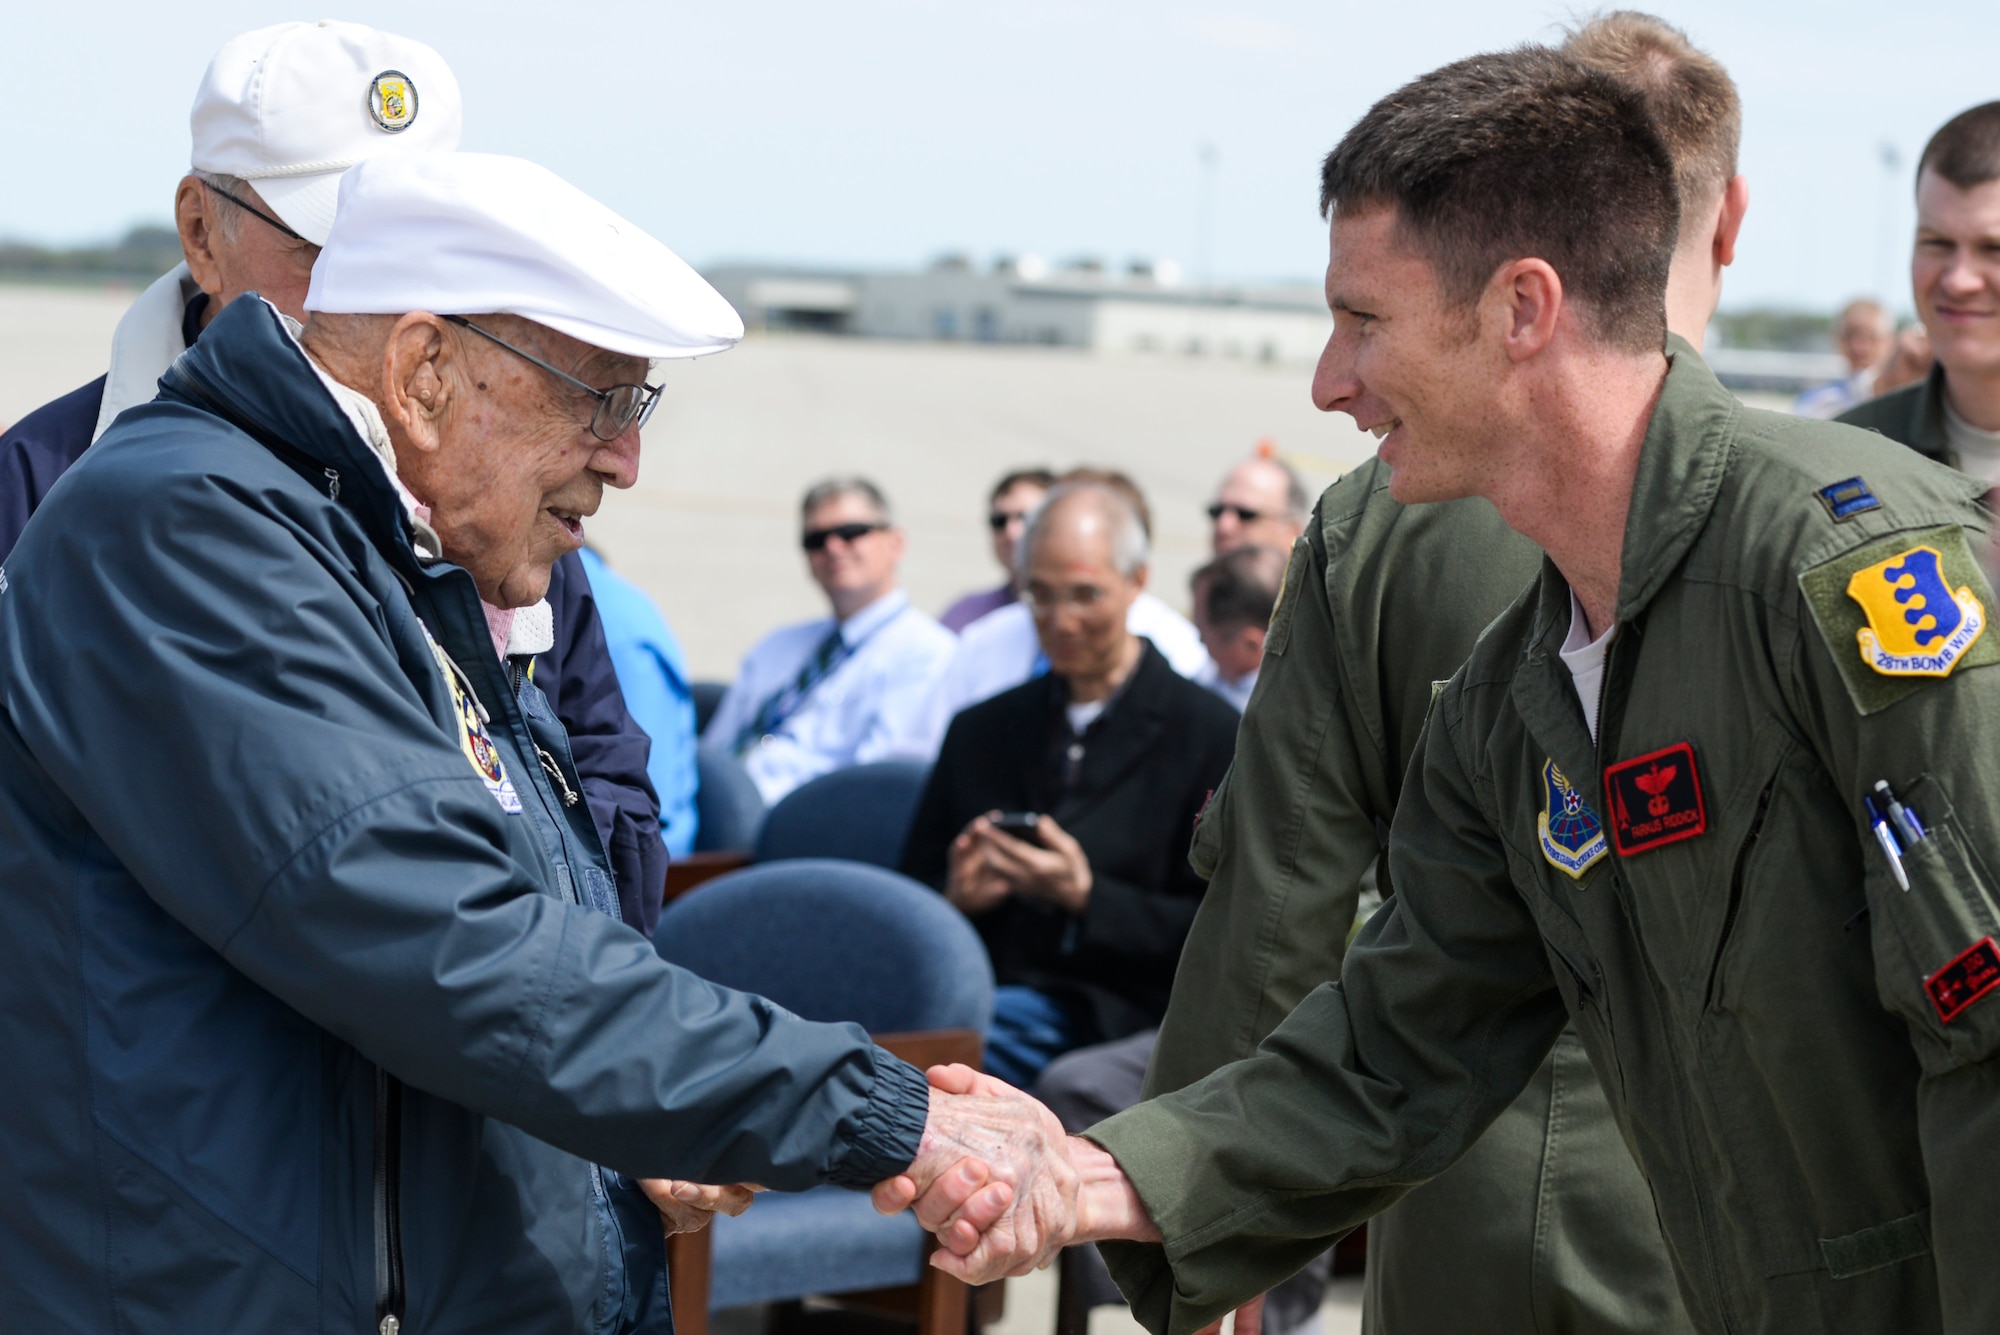 Retired Doolittle Raider, Lt. Col. Dick Cole, presents U.S. Air Force Capt. Michael Riddick, 34th Bomb Squadron B-1 pilot, with a coin at the conclusion of an unveiling ceremony for the new Ruptured Duck artwork, Apr. 17, 2017 at Wright-Patterson Air Force Base, Ohio.  The 34th Bomb Squadron lineage can be traced to one of the original Doolittle Raider squadrons. (U.S. Air Force photo by Wesley Farnsworth)